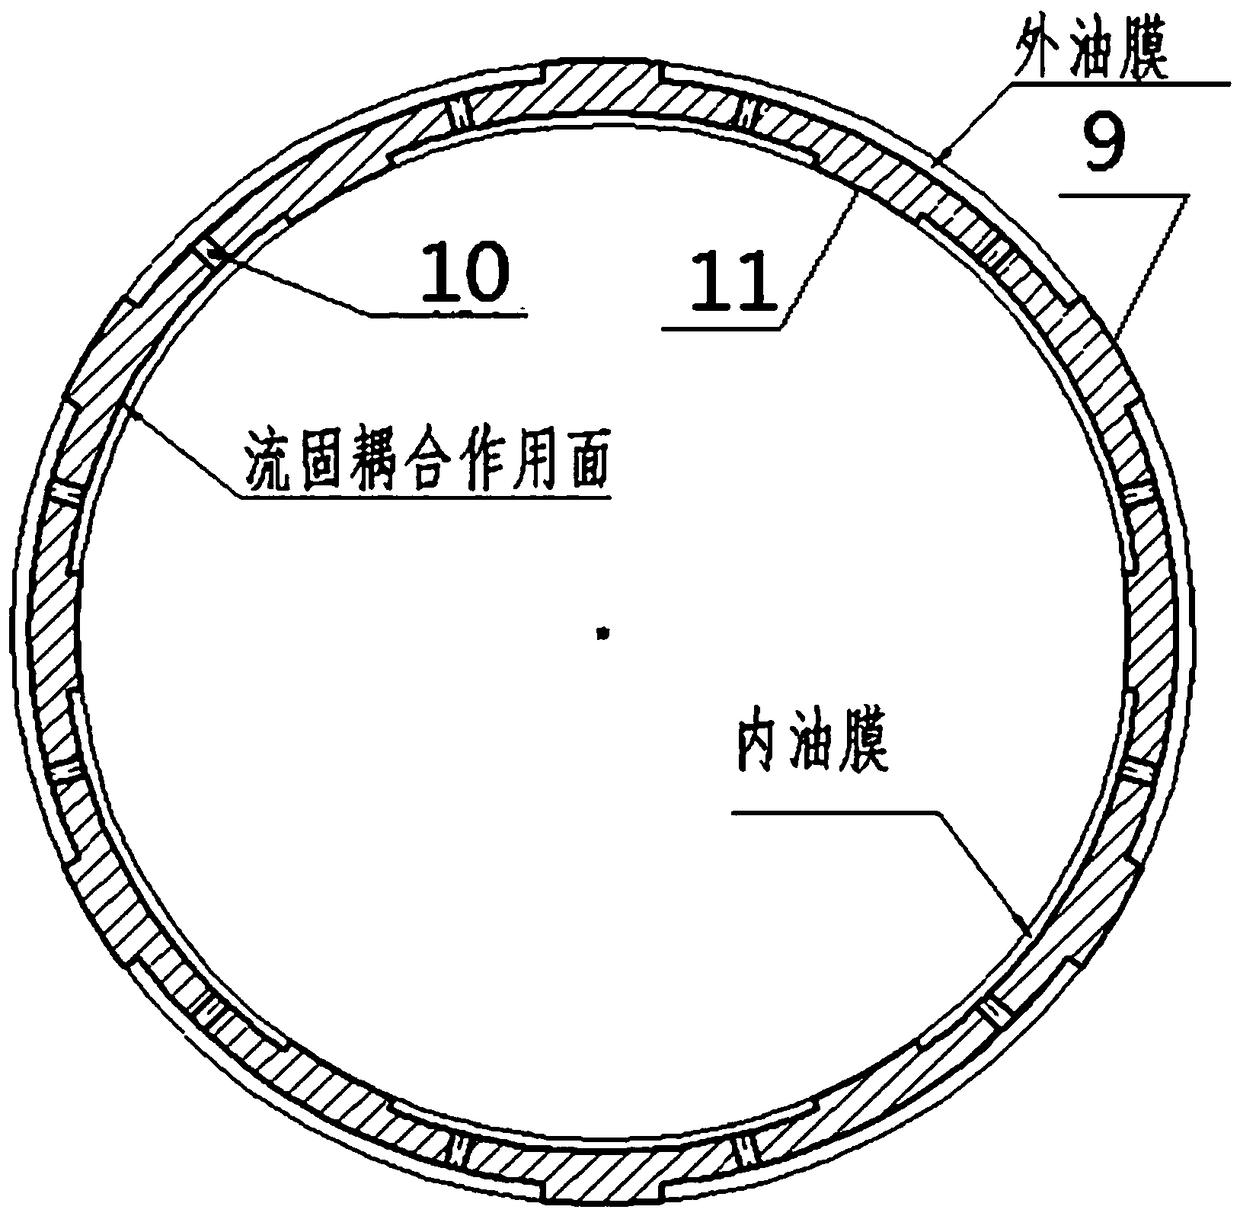 Coupling elastic-support type oil film damper bearing system for gas turbine